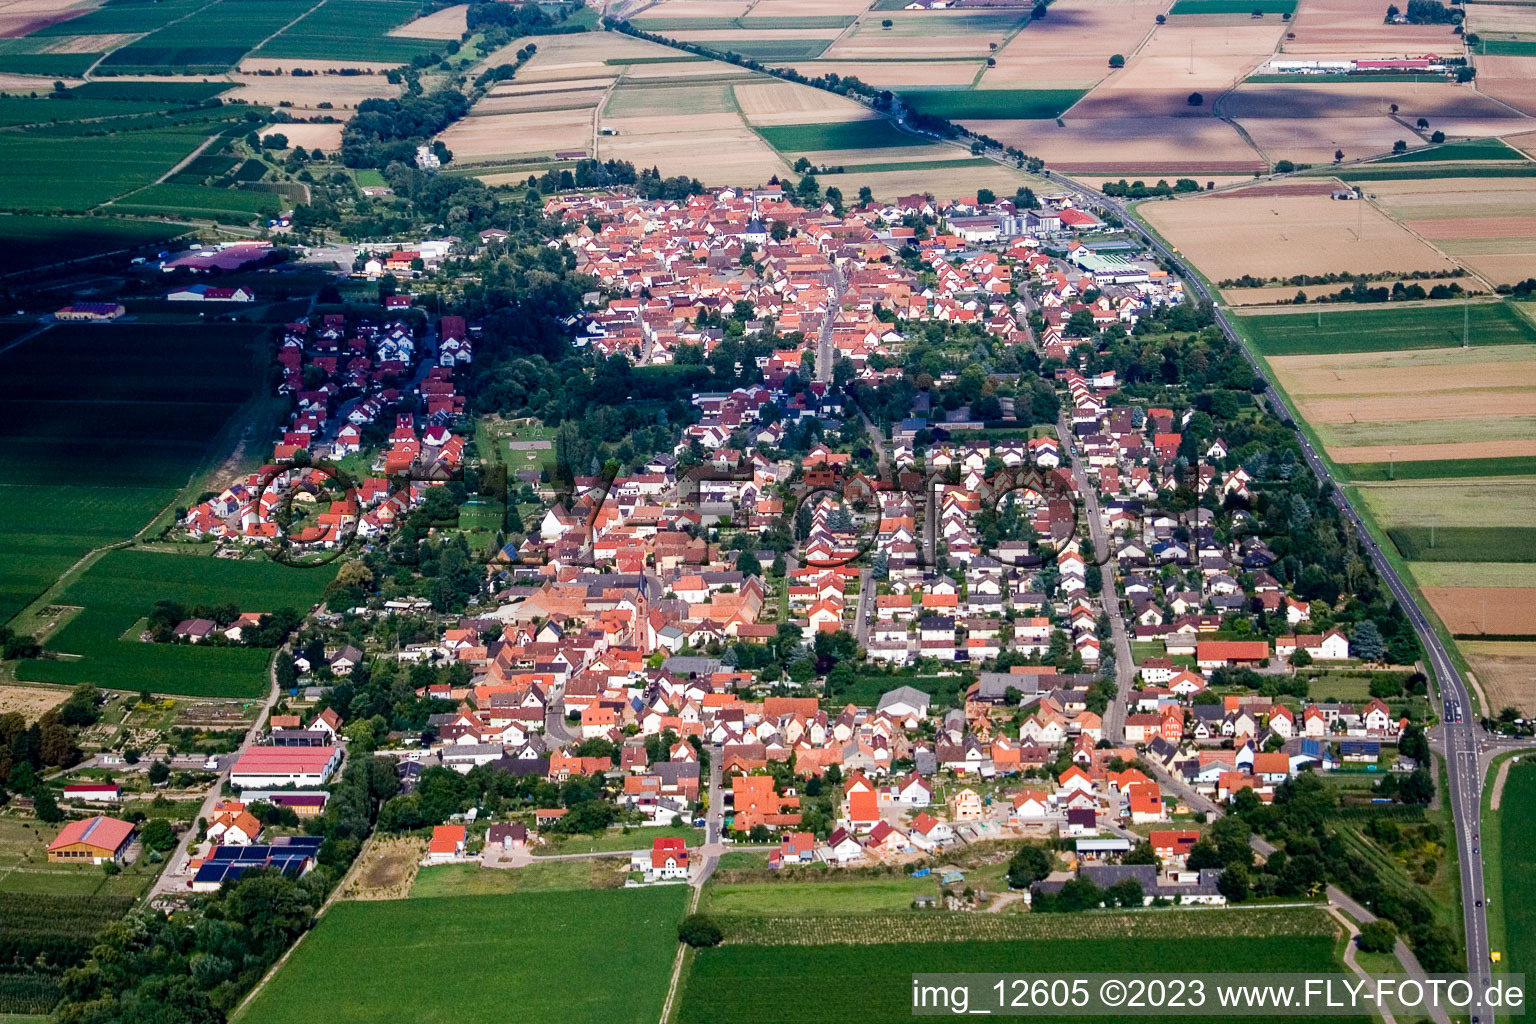 Essingen in the state Rhineland-Palatinate, Germany from the plane